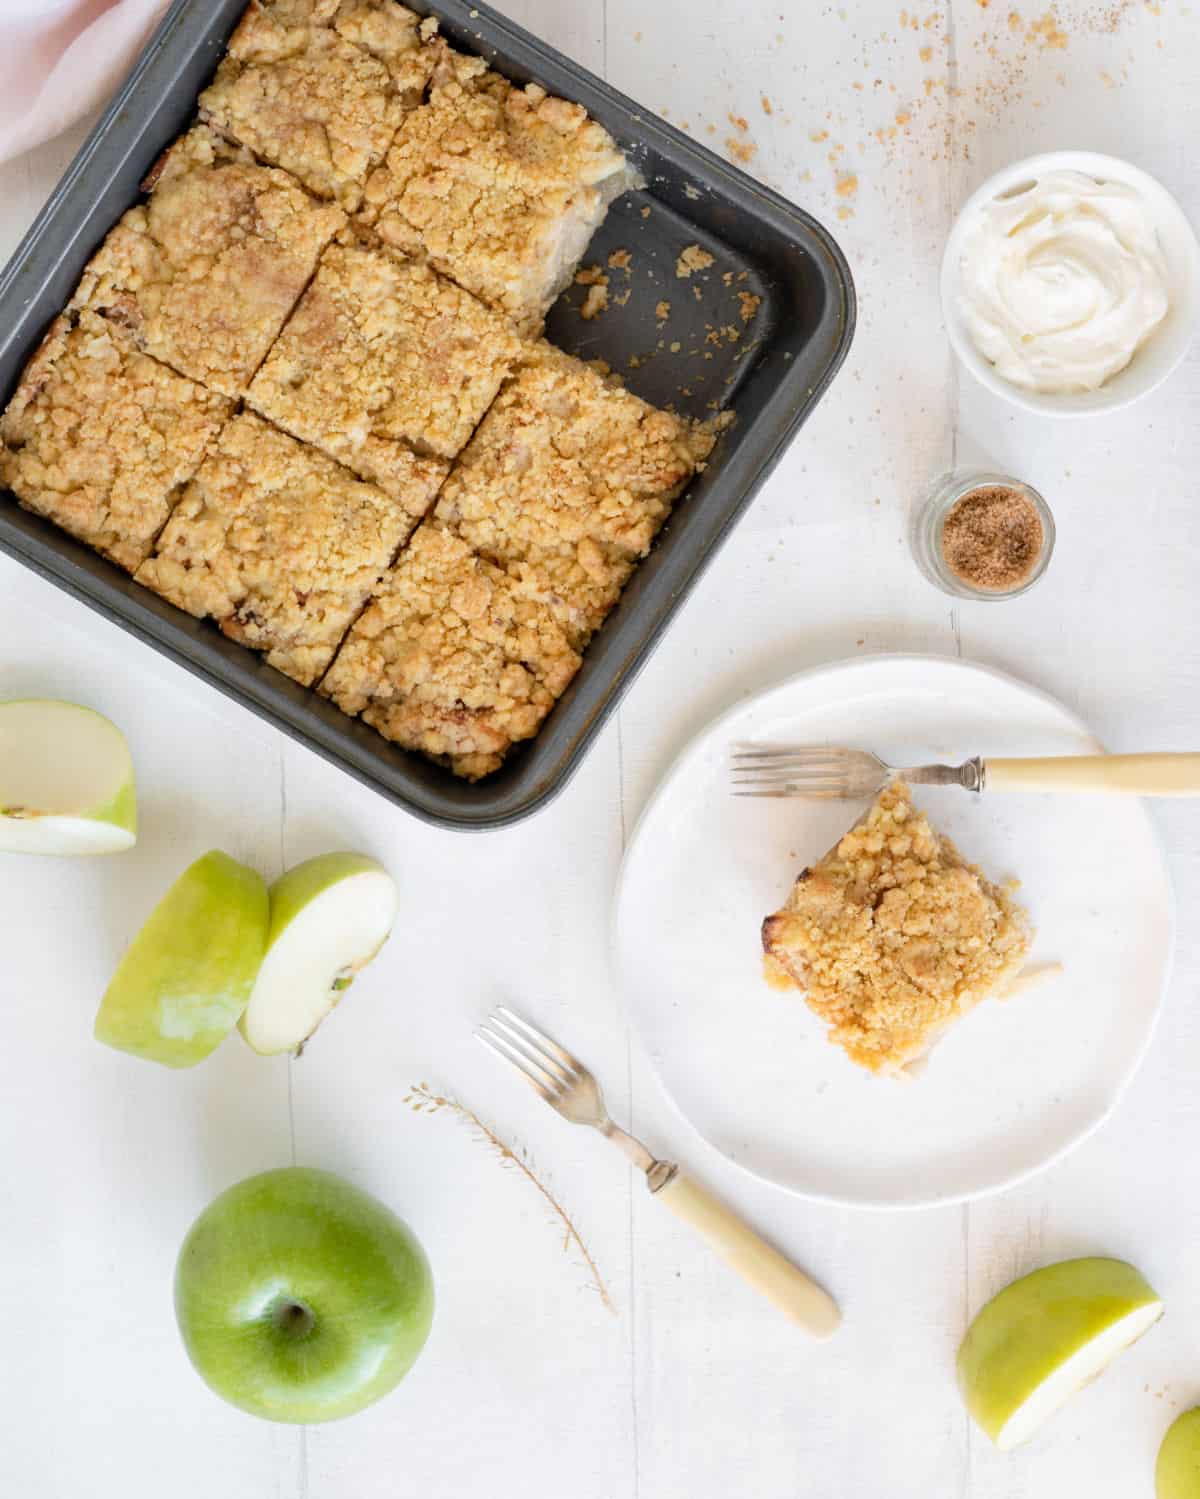 Top view of square metal pan with apple crumb bars, serving on a white plate, white surface, apples and forks around.